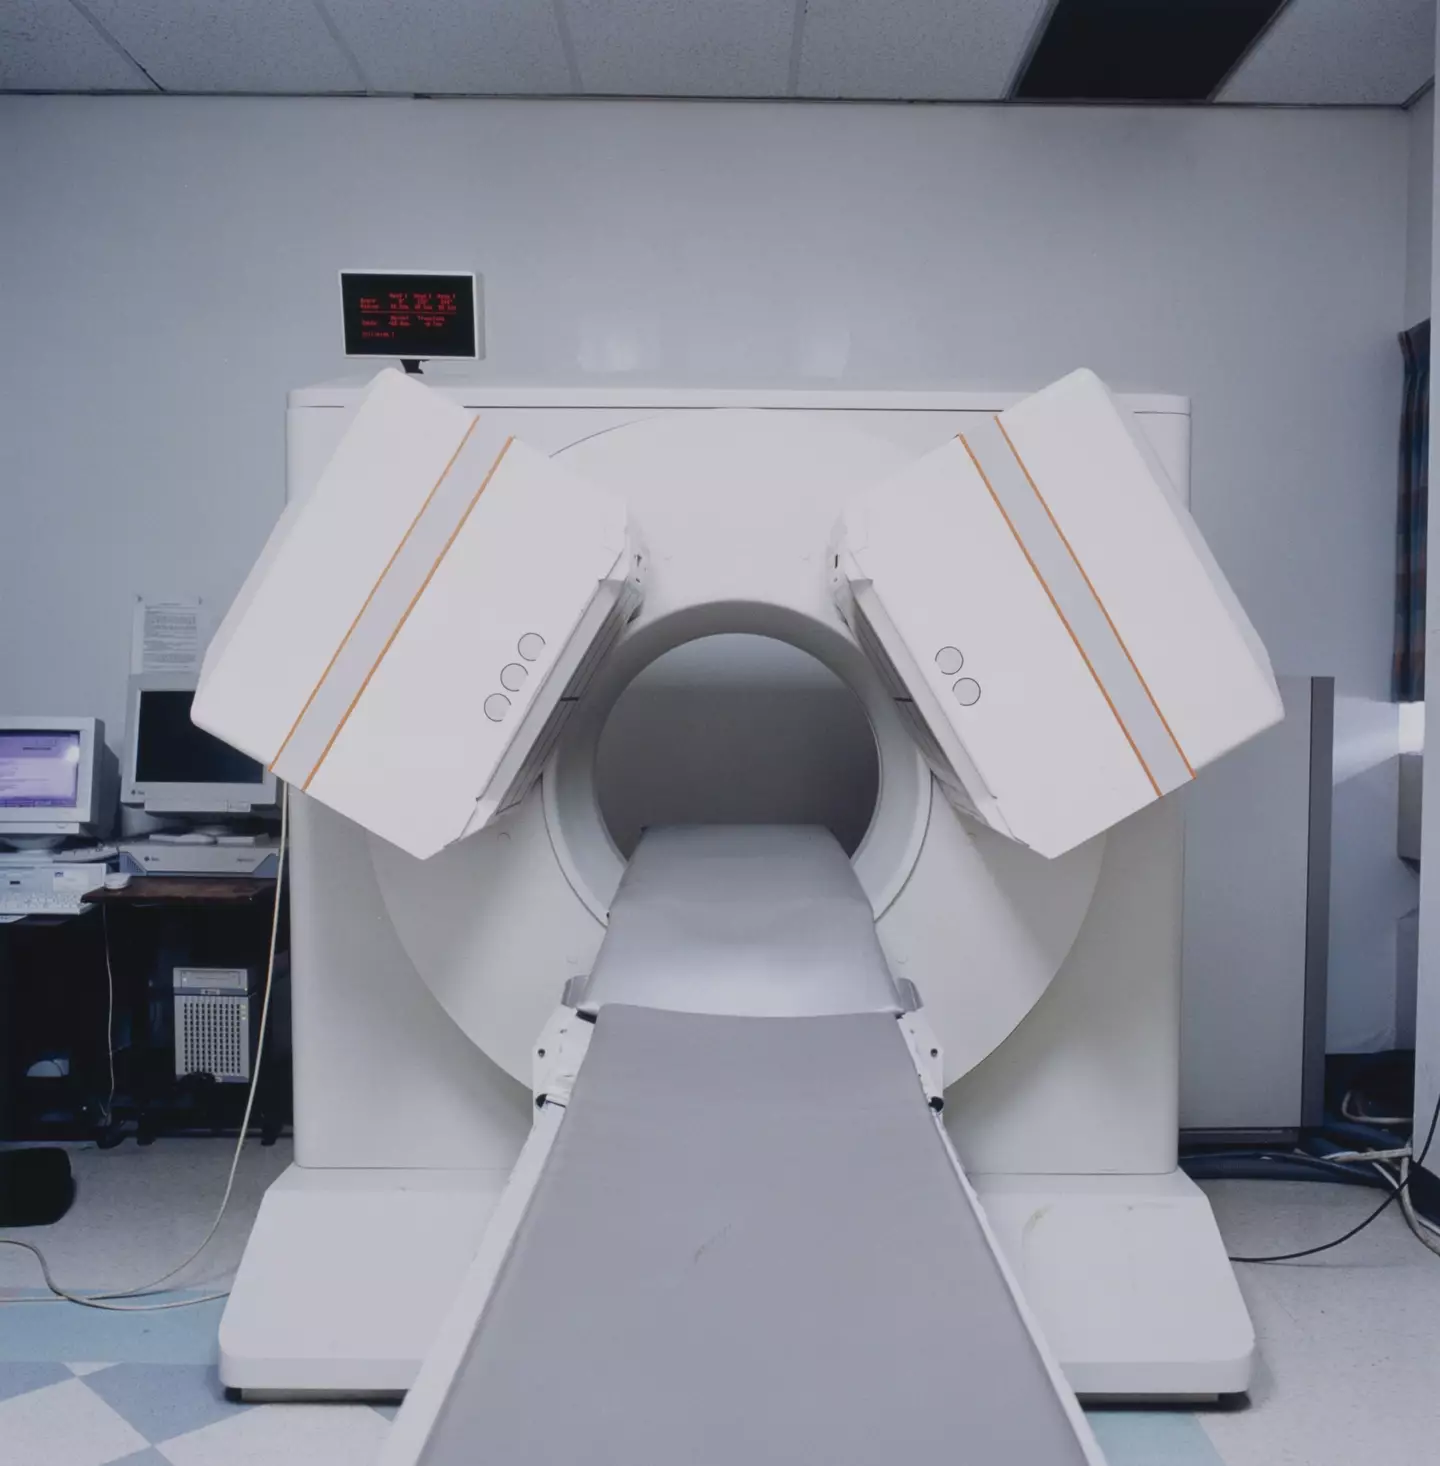 You should take out all metal for an MRI.